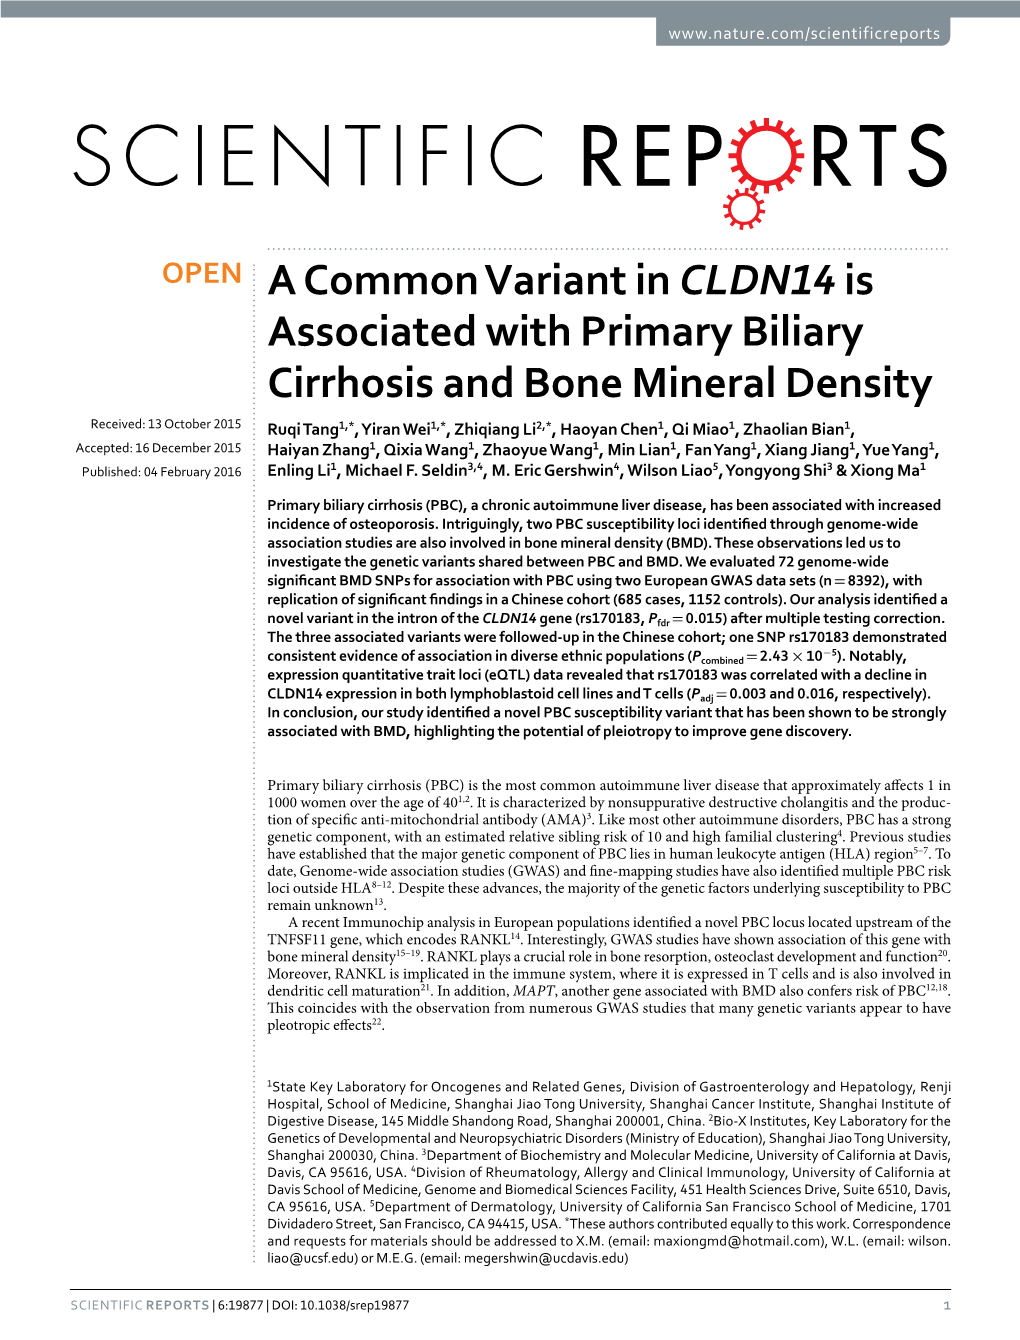 A Common Variant in CLDN14 Is Associated with Primary Biliary